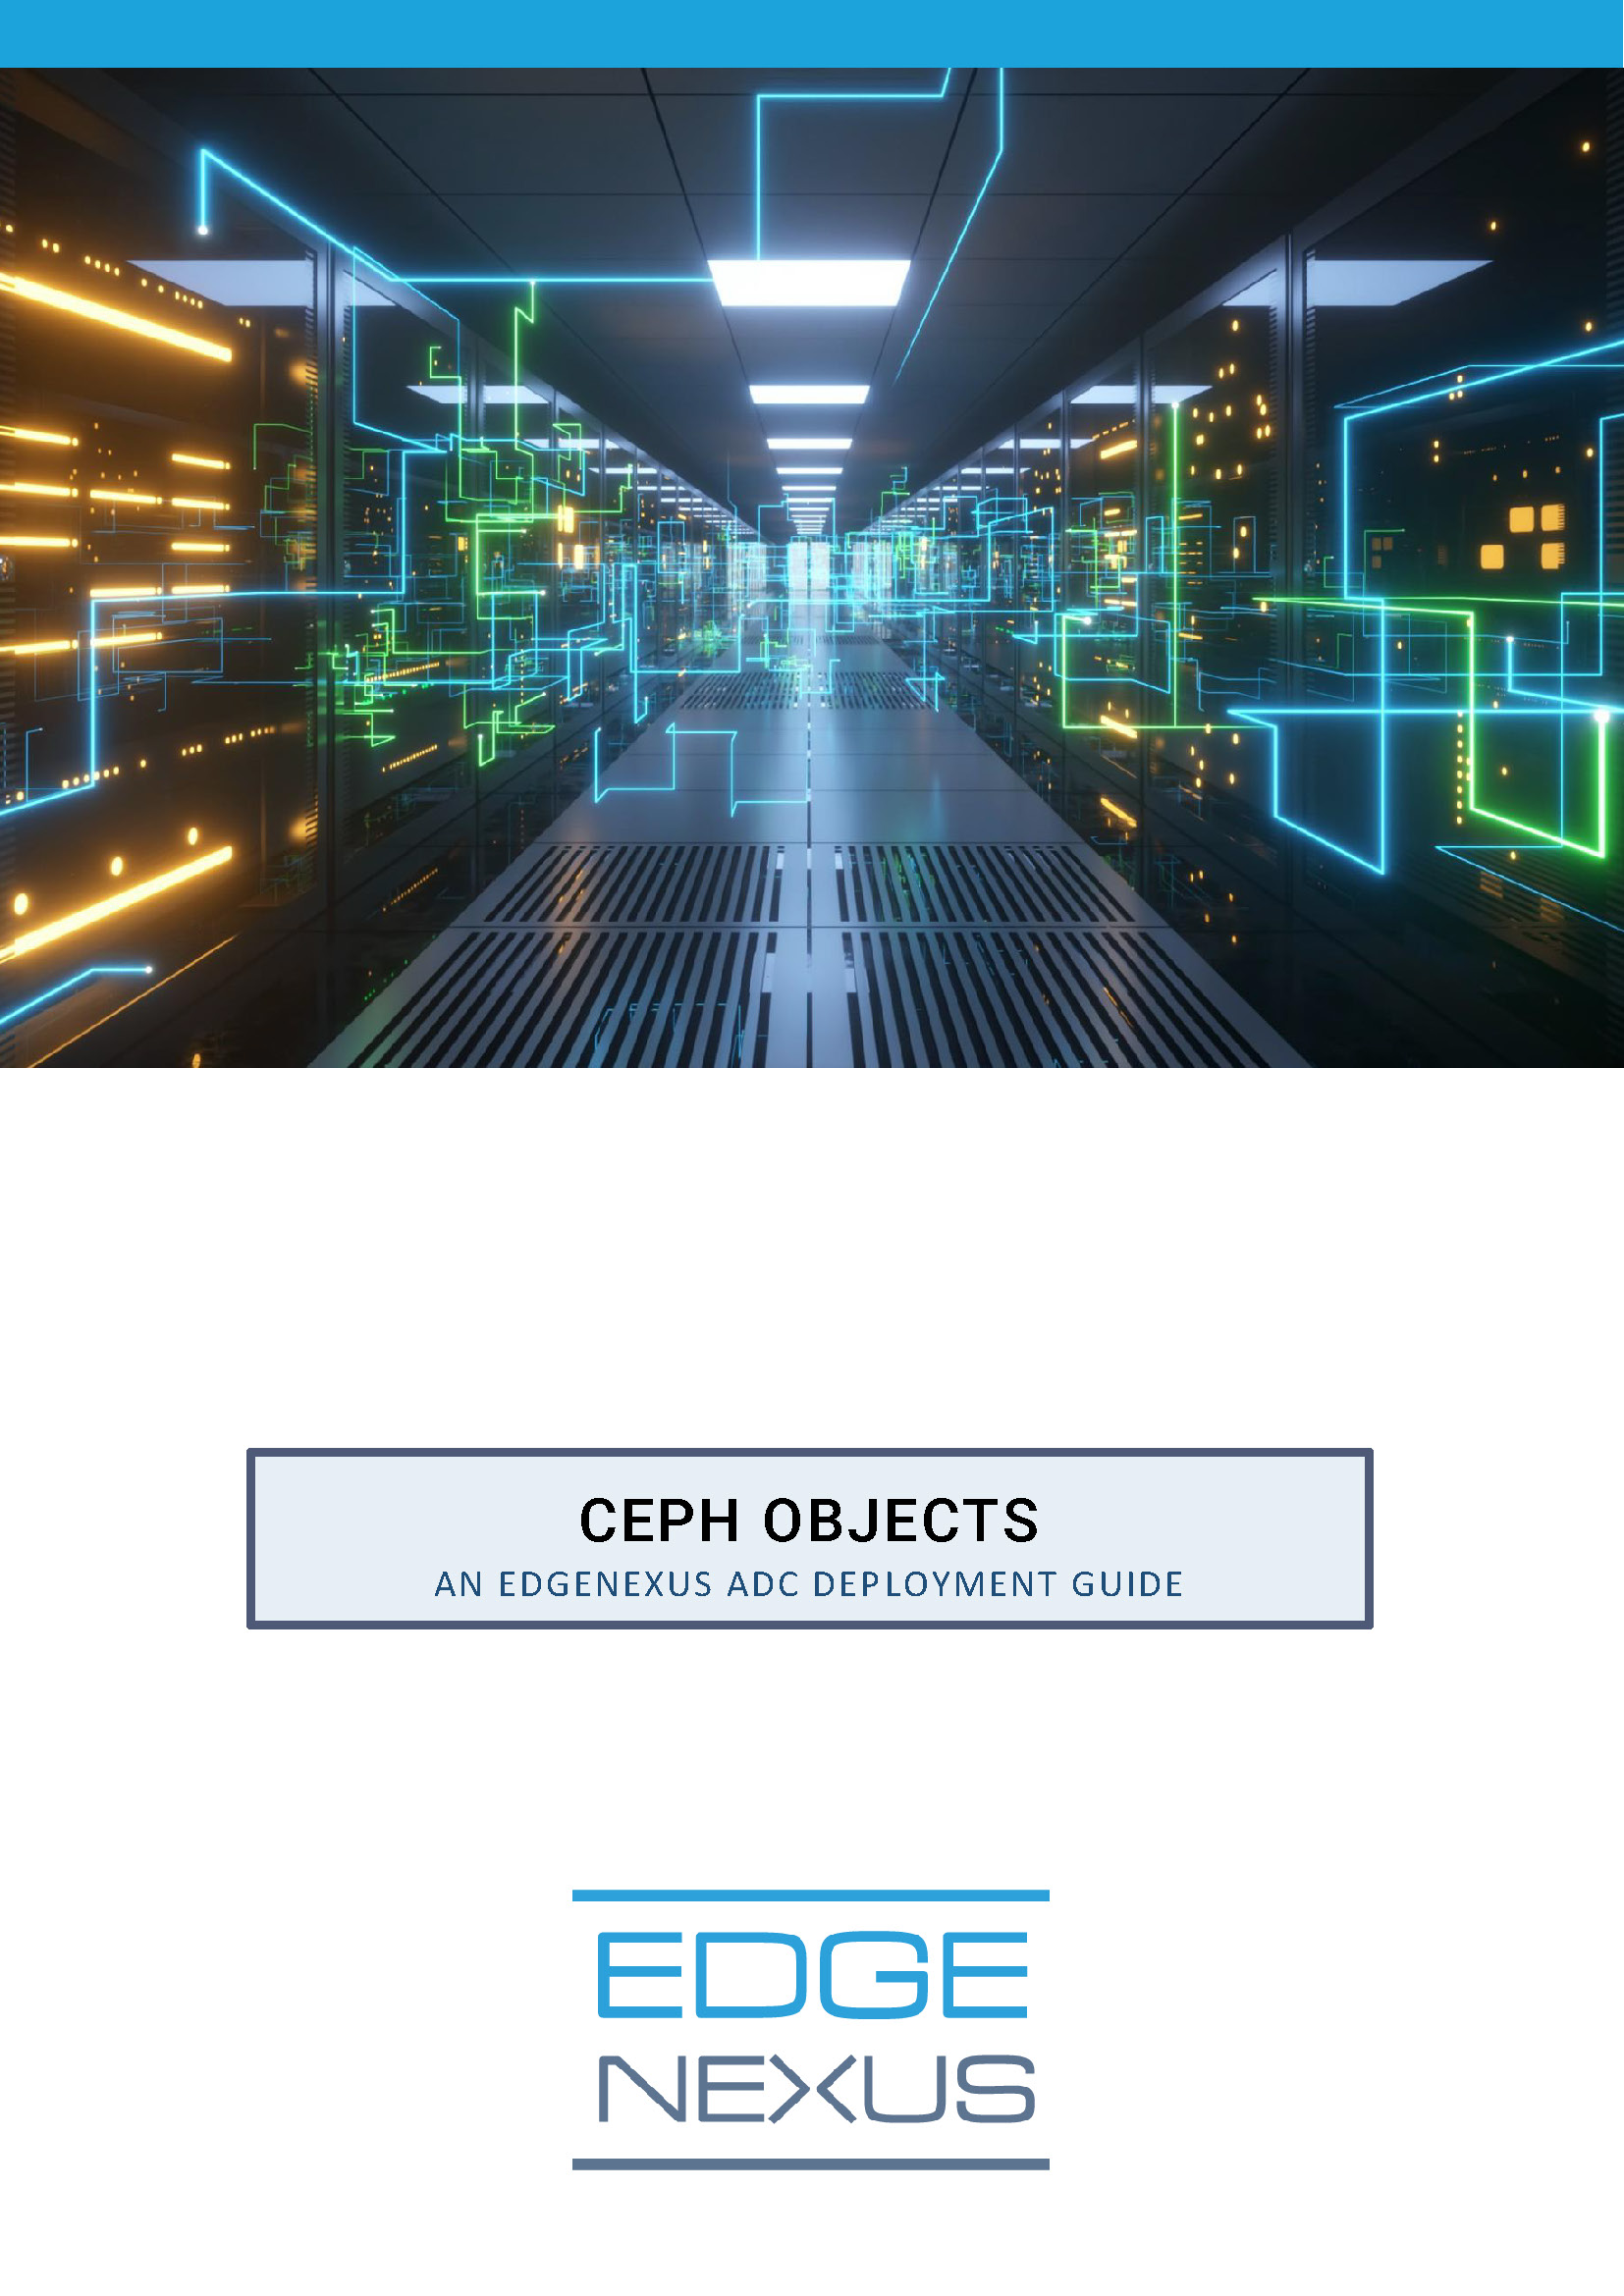 Ceph Objects ADG